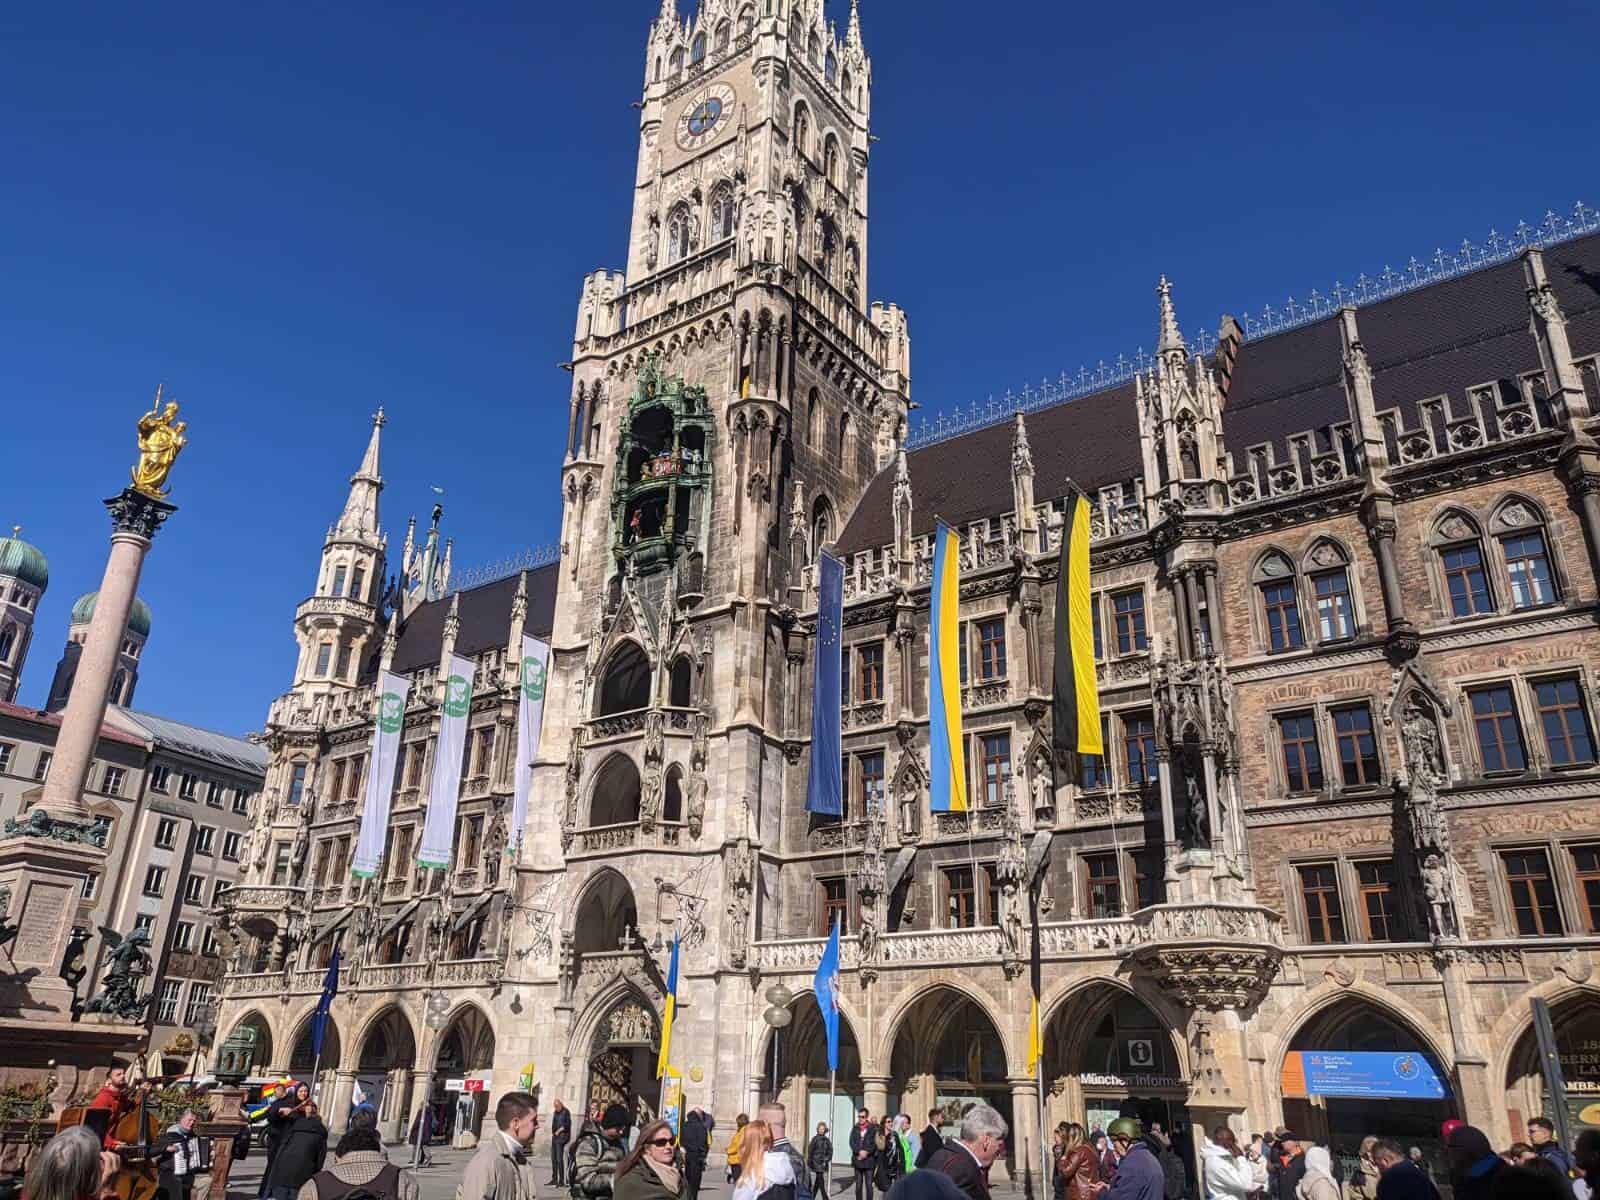 Marienplatz and a view of the Neues Rathaus (which bombing rendered ironically older than the Altes Rathaus)